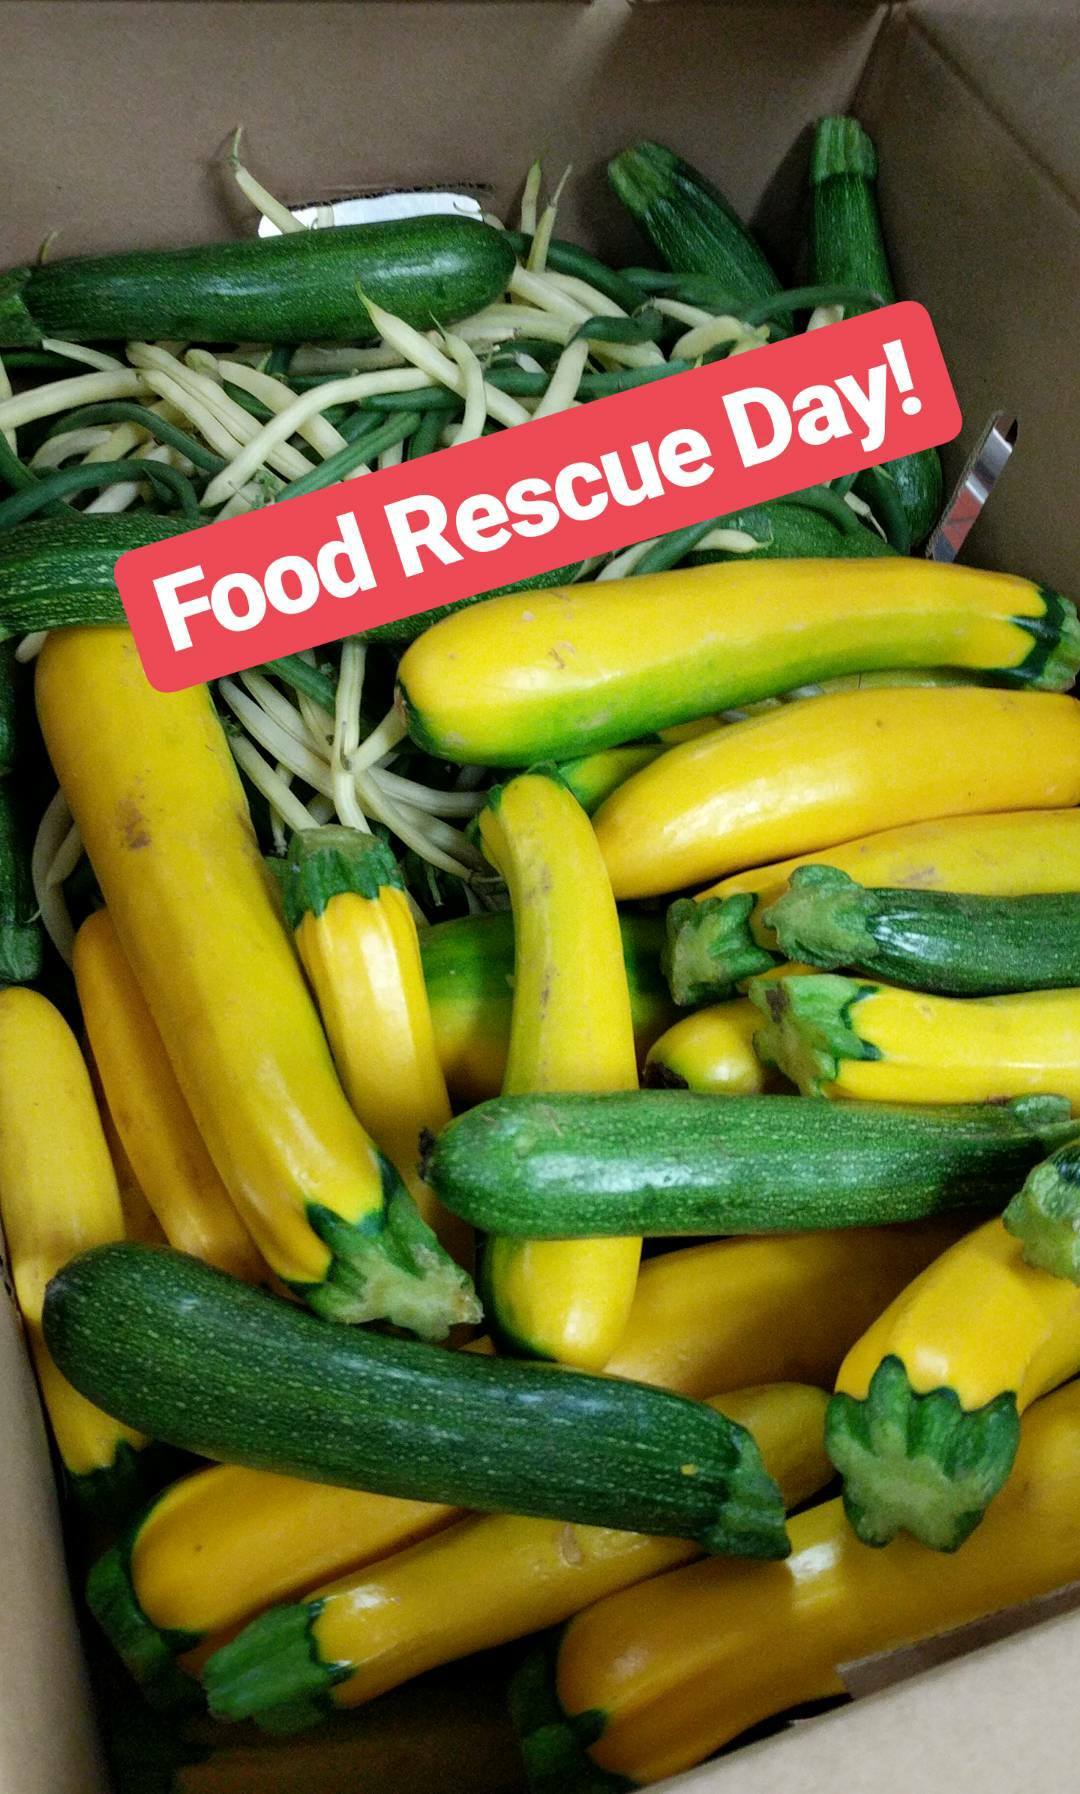 Food rescue fights hunger